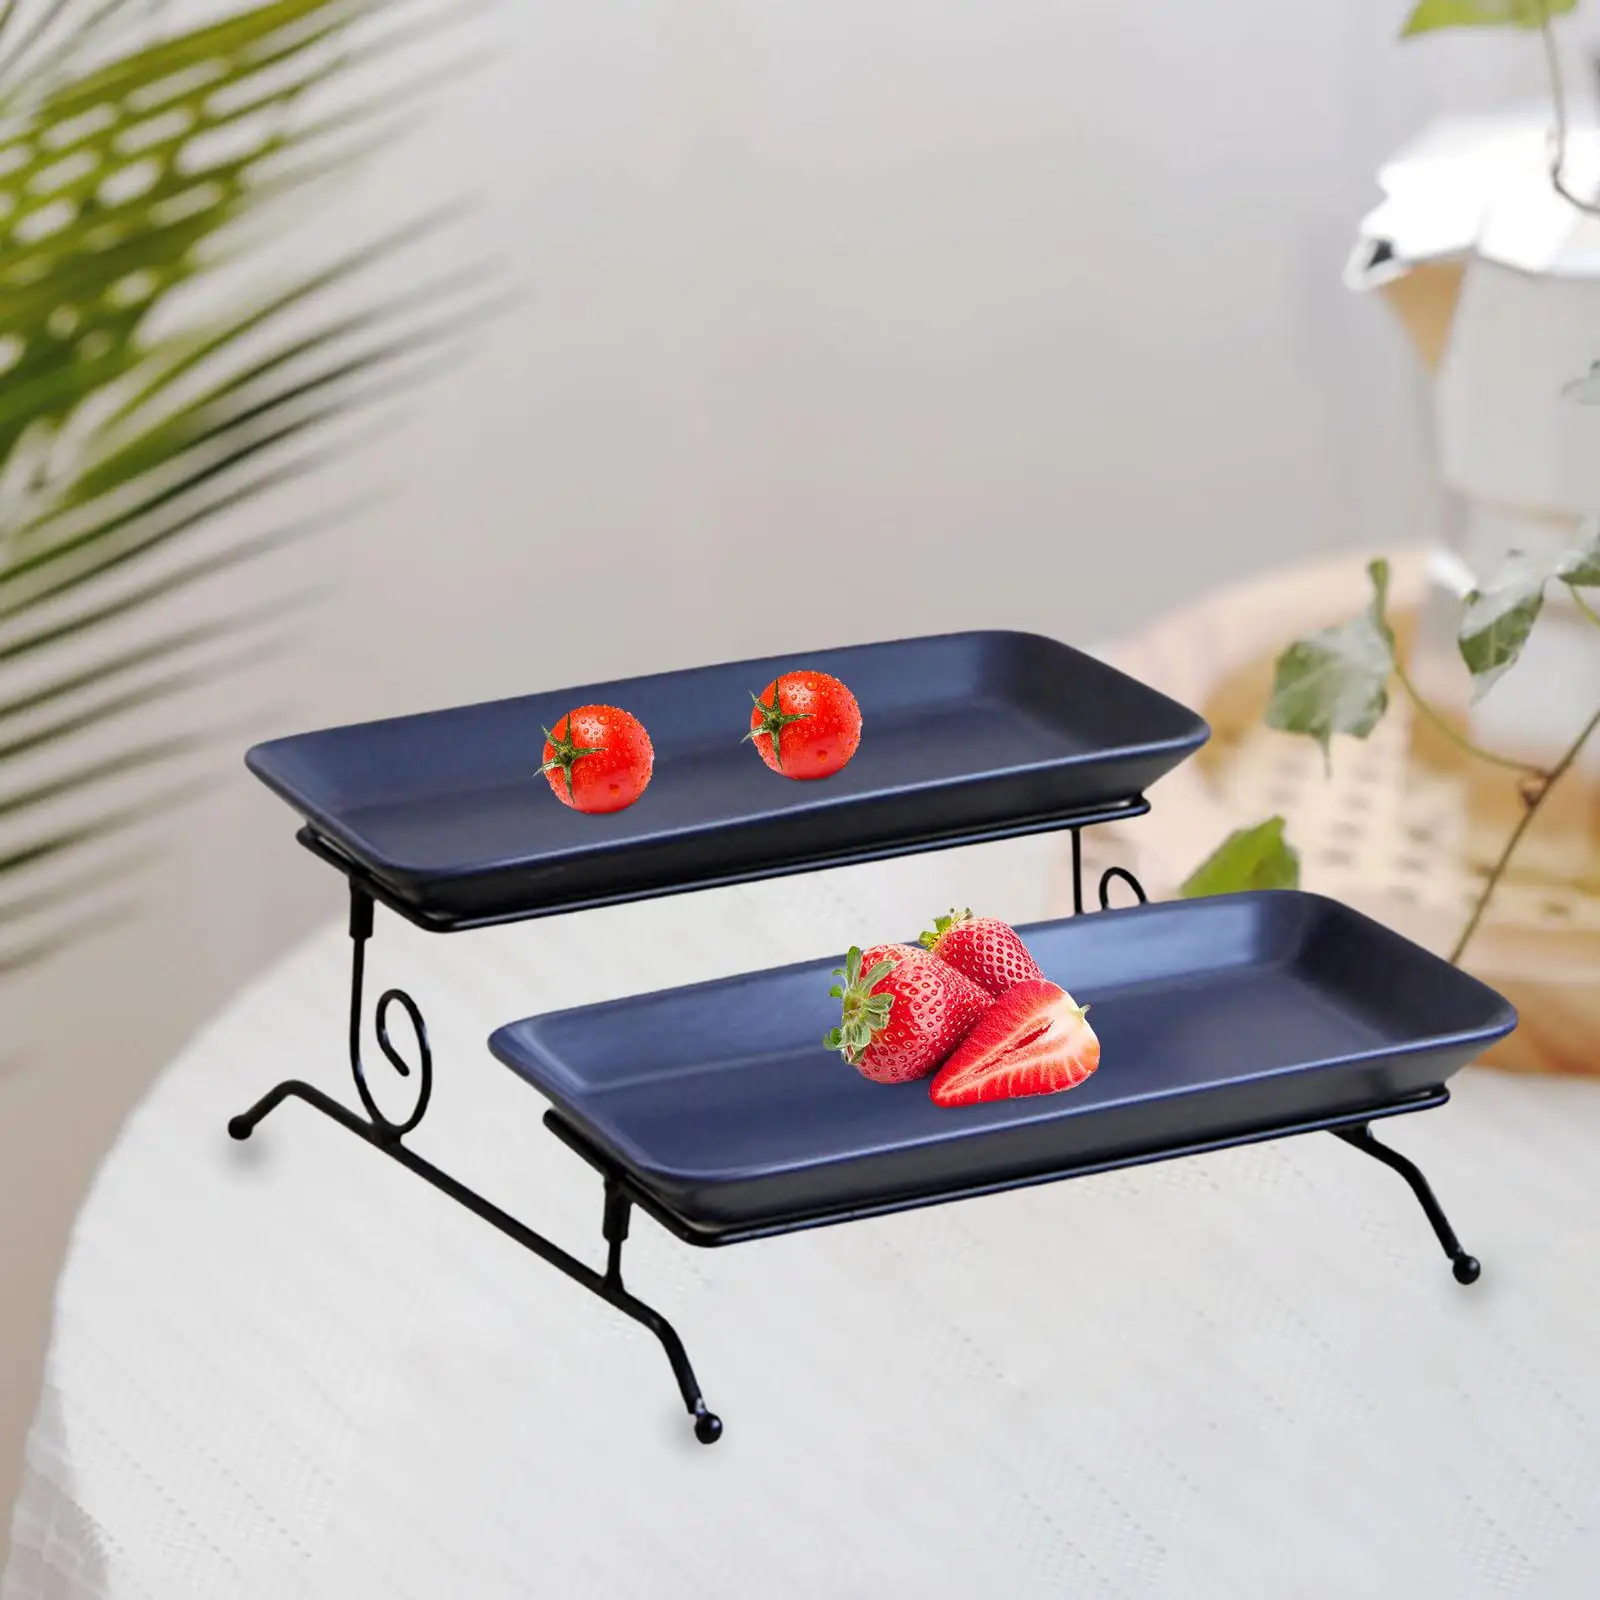 Candy Dessert Plate 2 Layer Serving Platter Cupcake Cake Stand Holder Snack Display Tray Dessert Tray for Hotel Decor